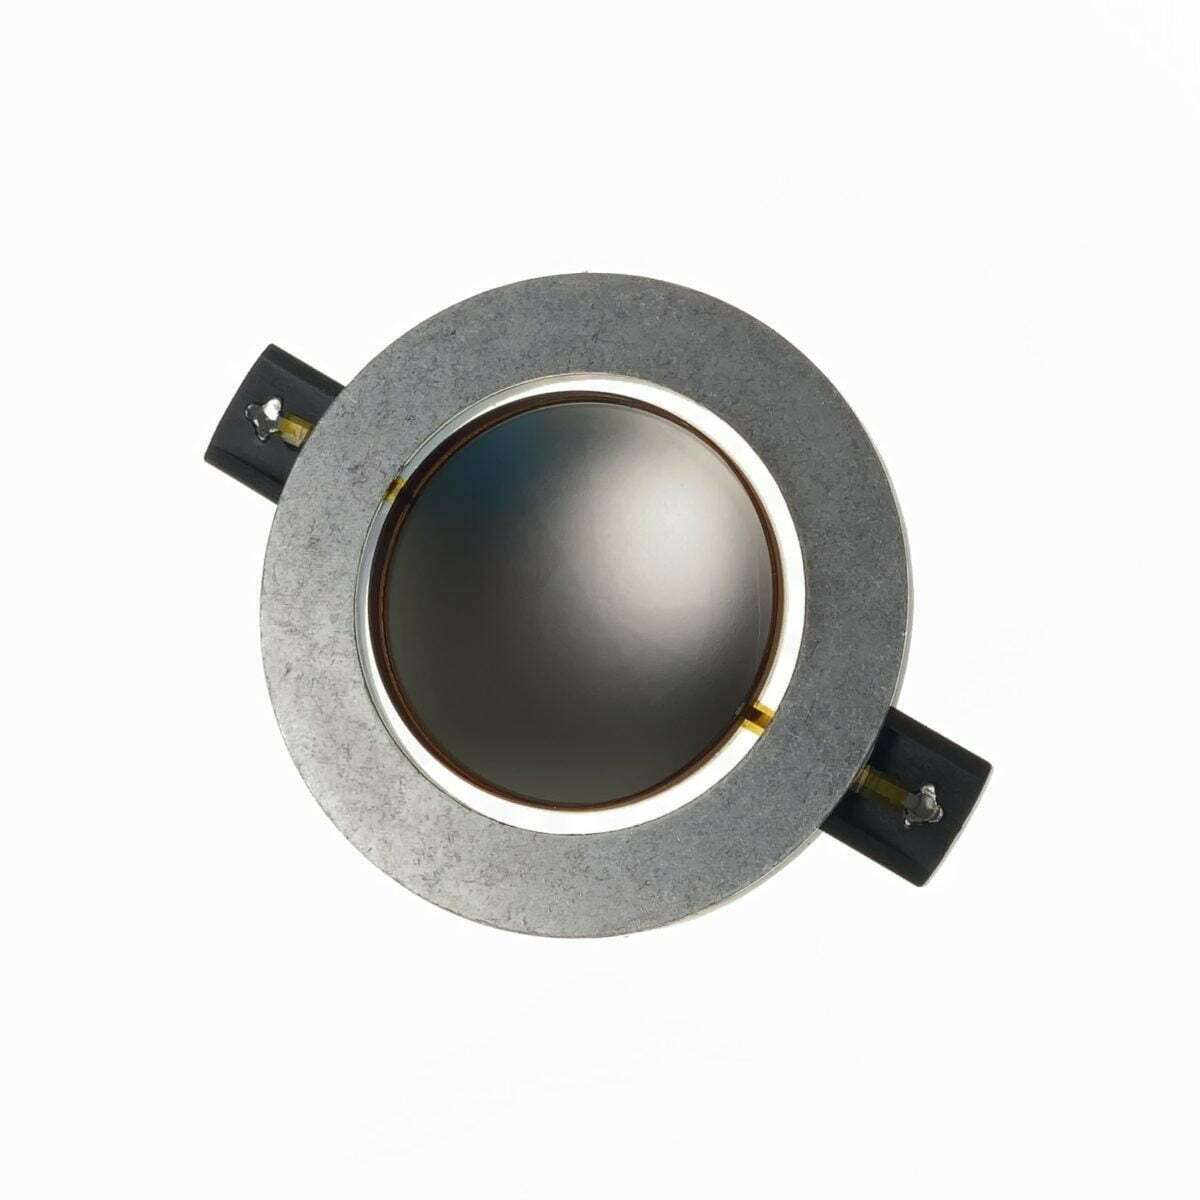 Replacement Diaphragm for RCF N450, ART 300A, RCF-M81, RCF N350, EAW 15410081 on a white background